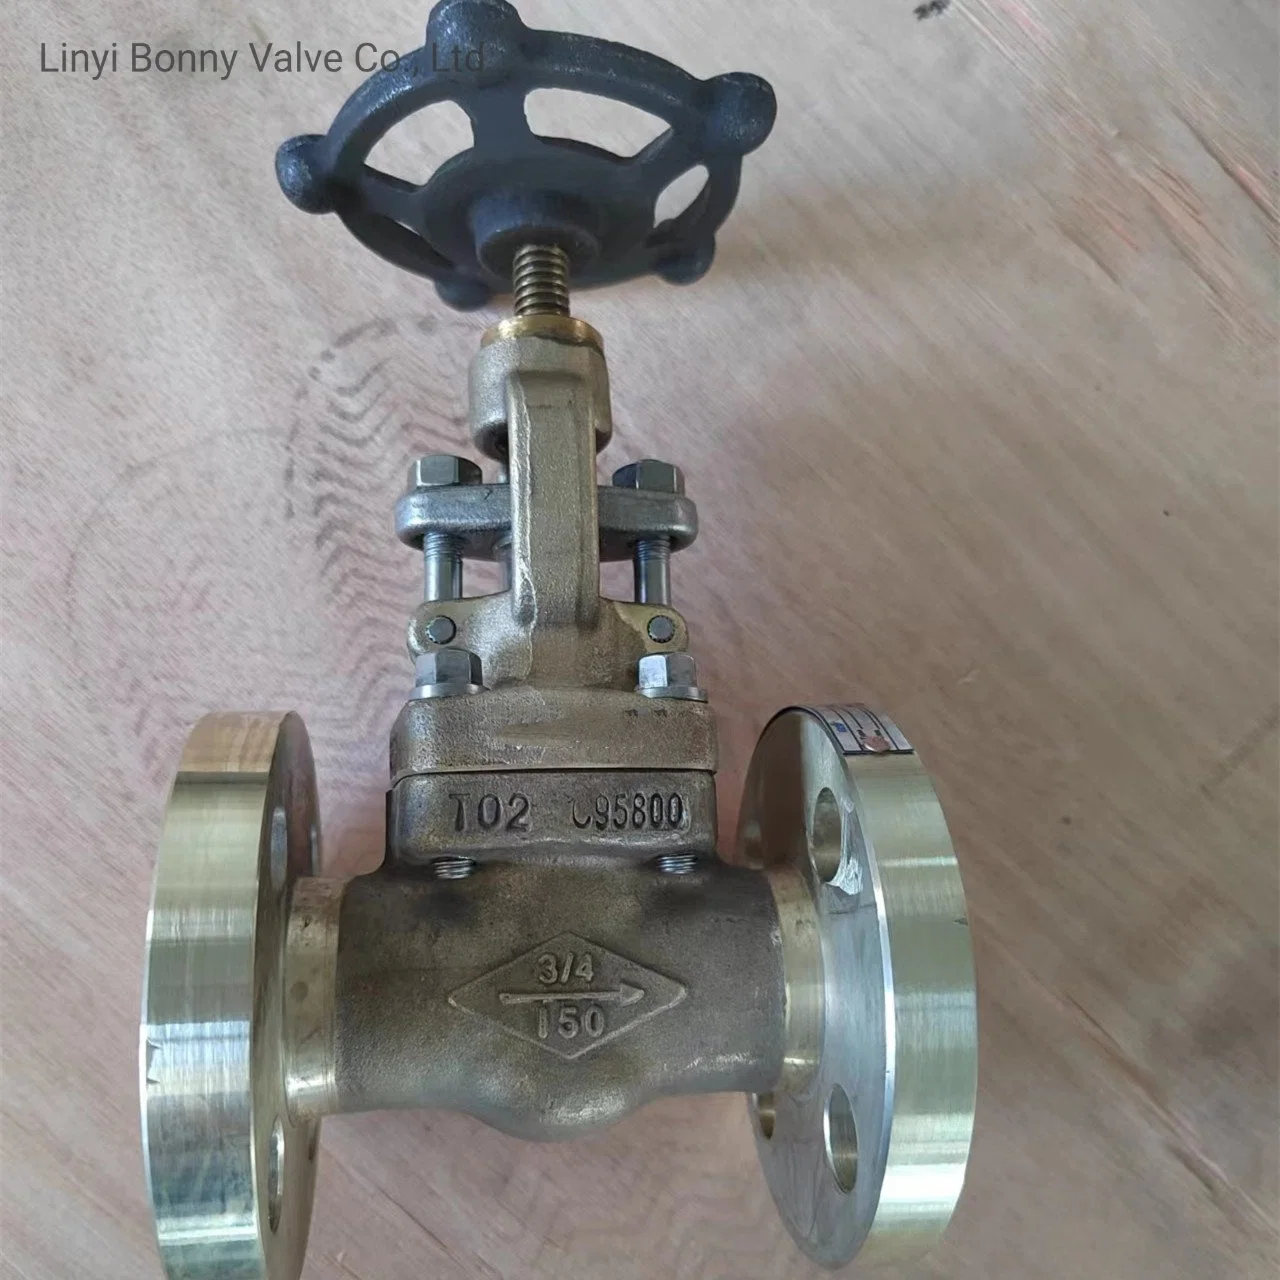 Double Flanges Globe Valve with A105 1500lb